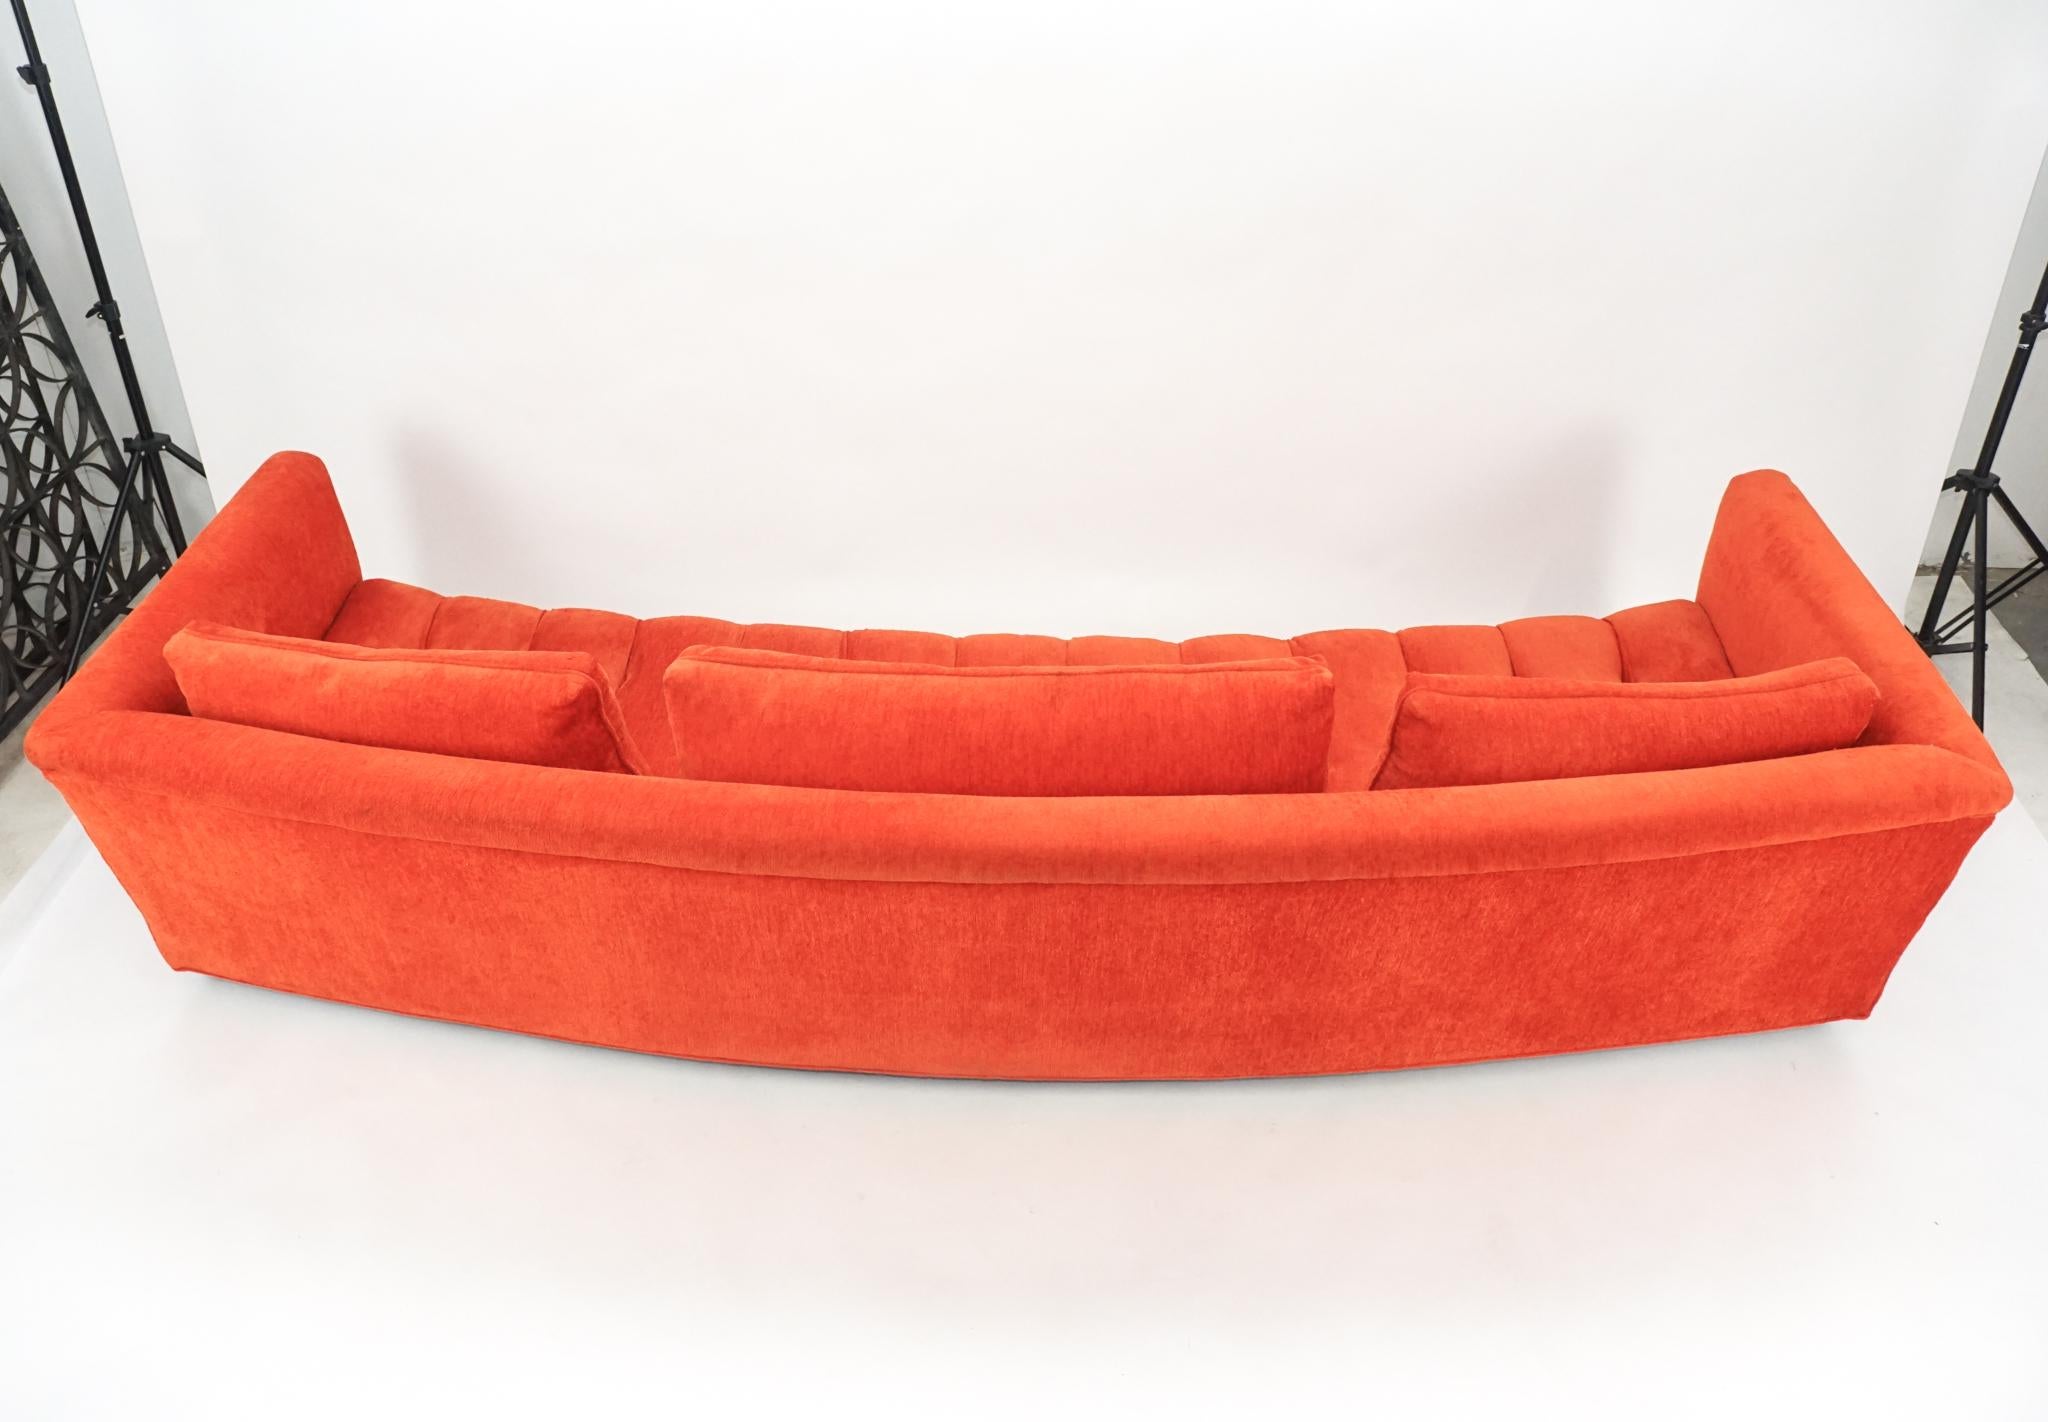 American Mid-Century Modern Sculptural Curved Tufted Erwin Lambeth Sofa in Red